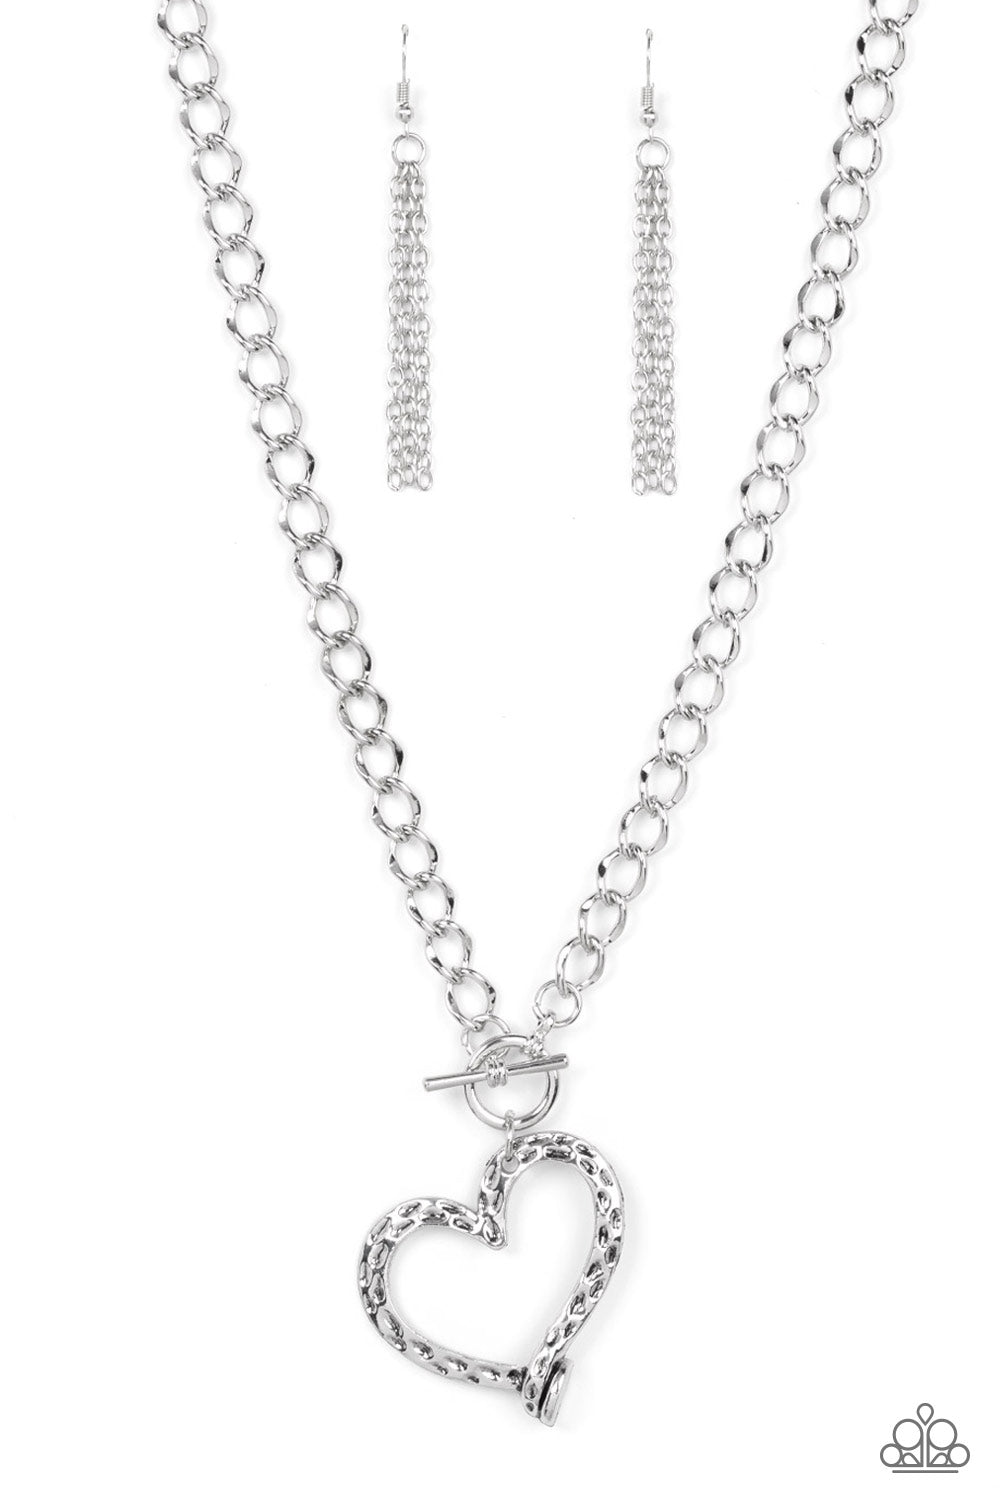 Reimagined Romance Silver Necklace